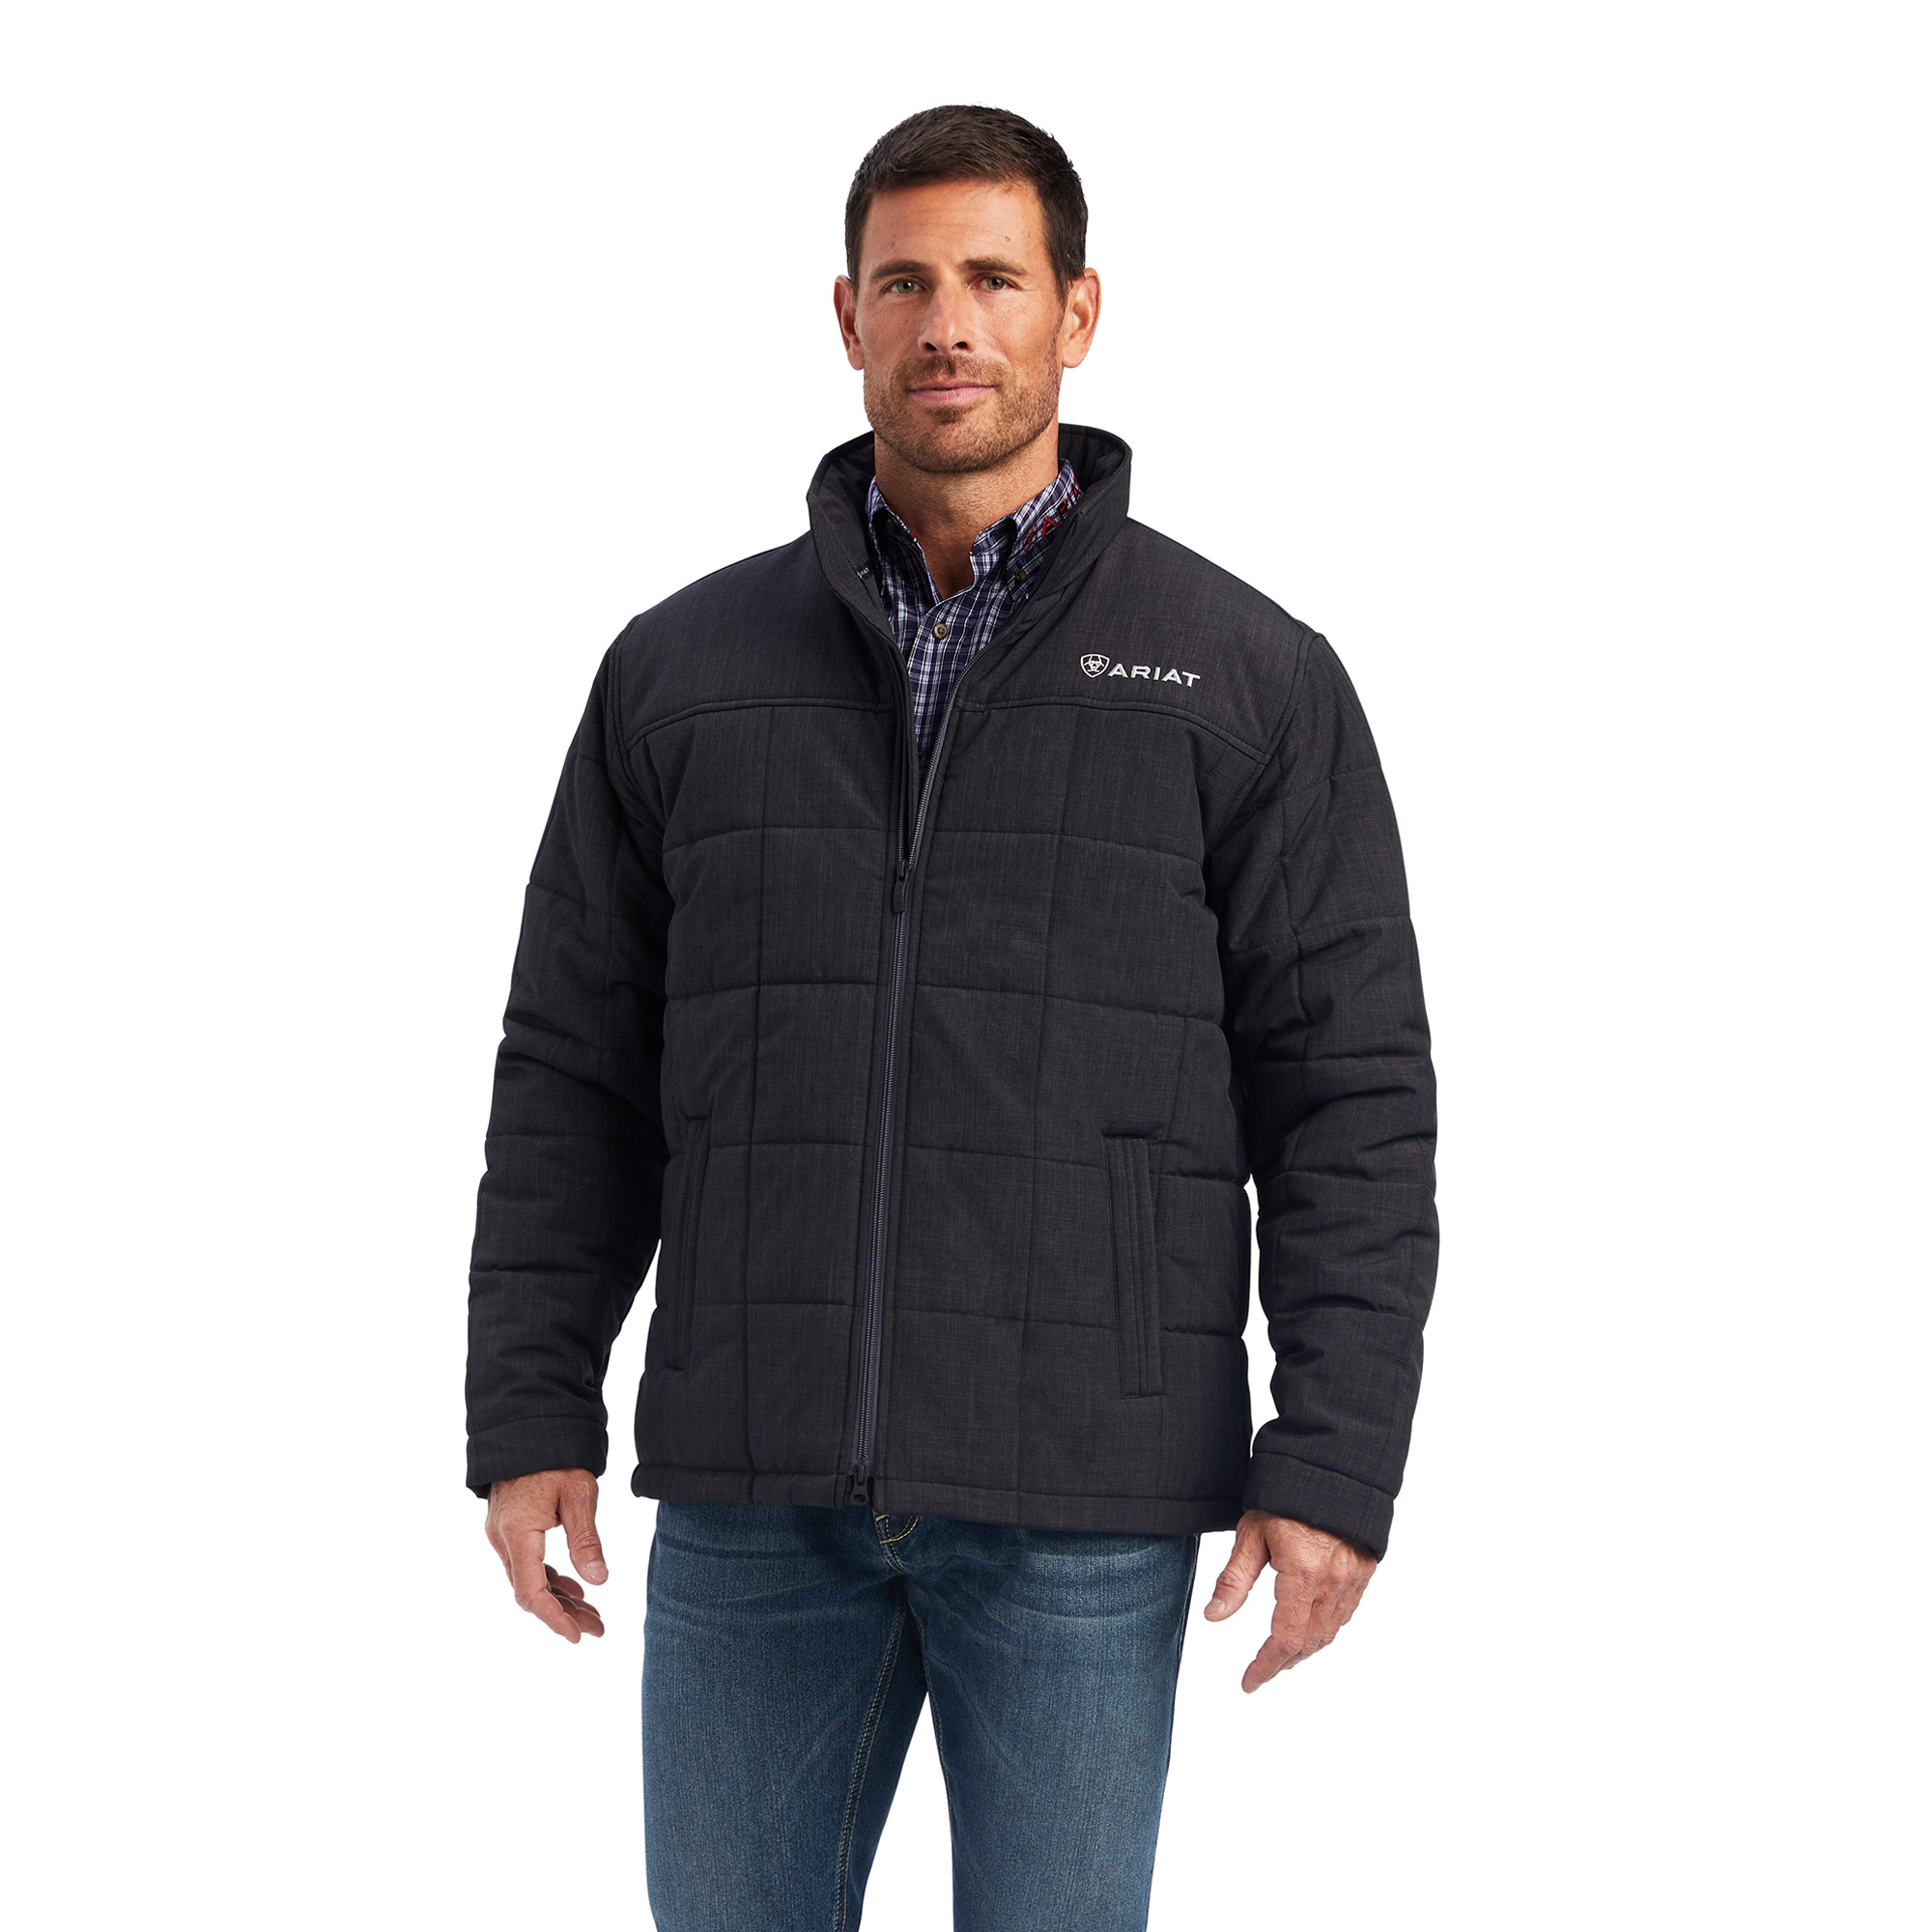 Crius Insulated Jacket in Phantom Front View